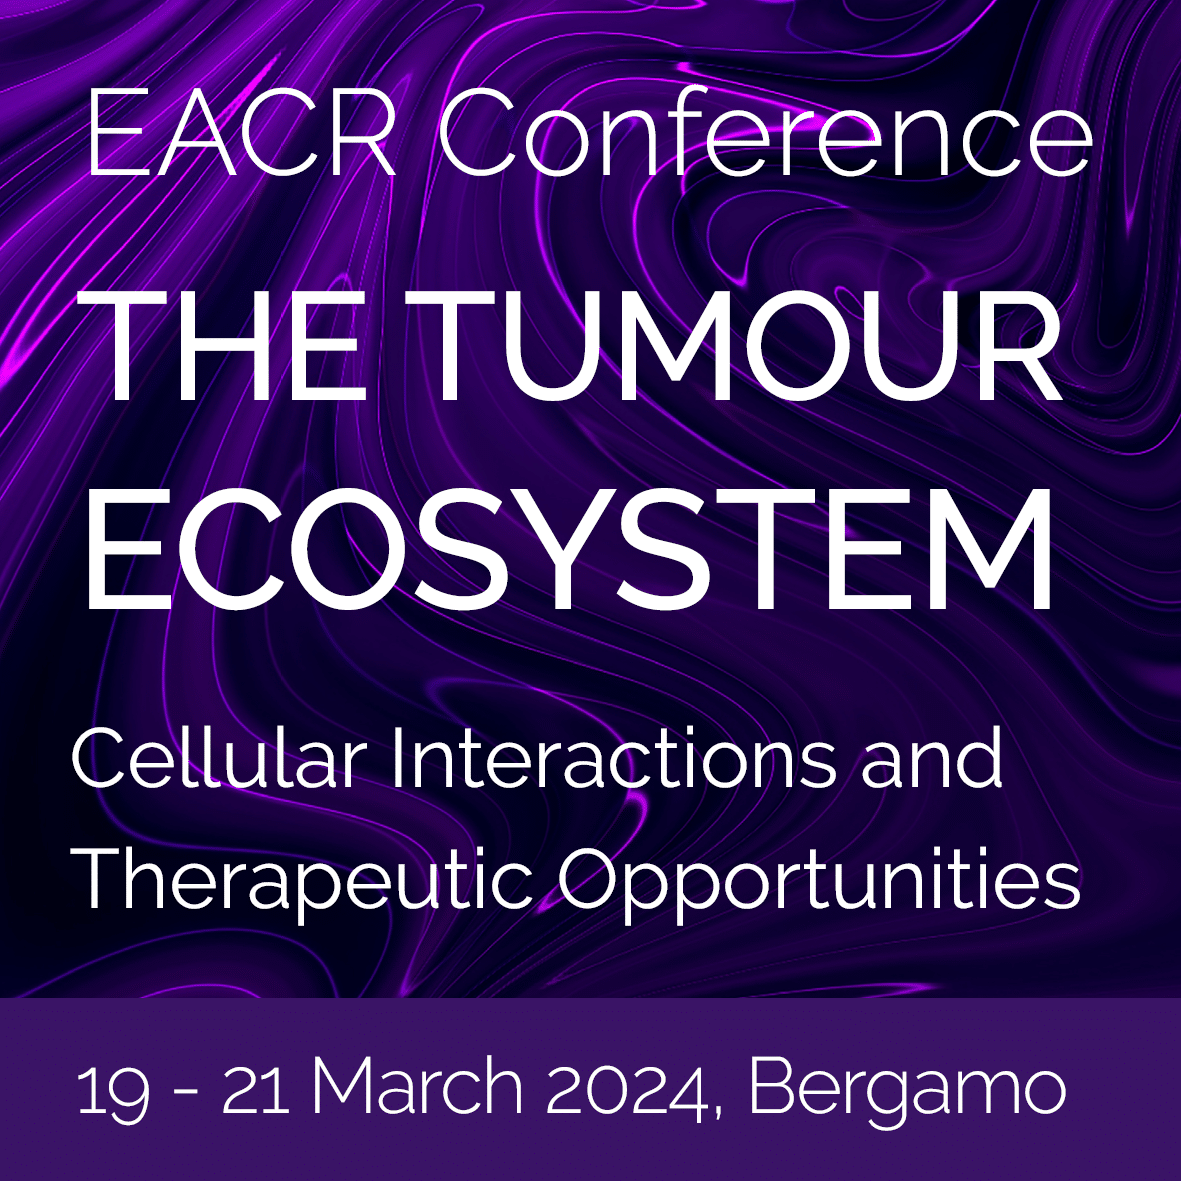 EACR The Tumour Ecosystem: Cellular Interactions and Therapeutic Opportunities